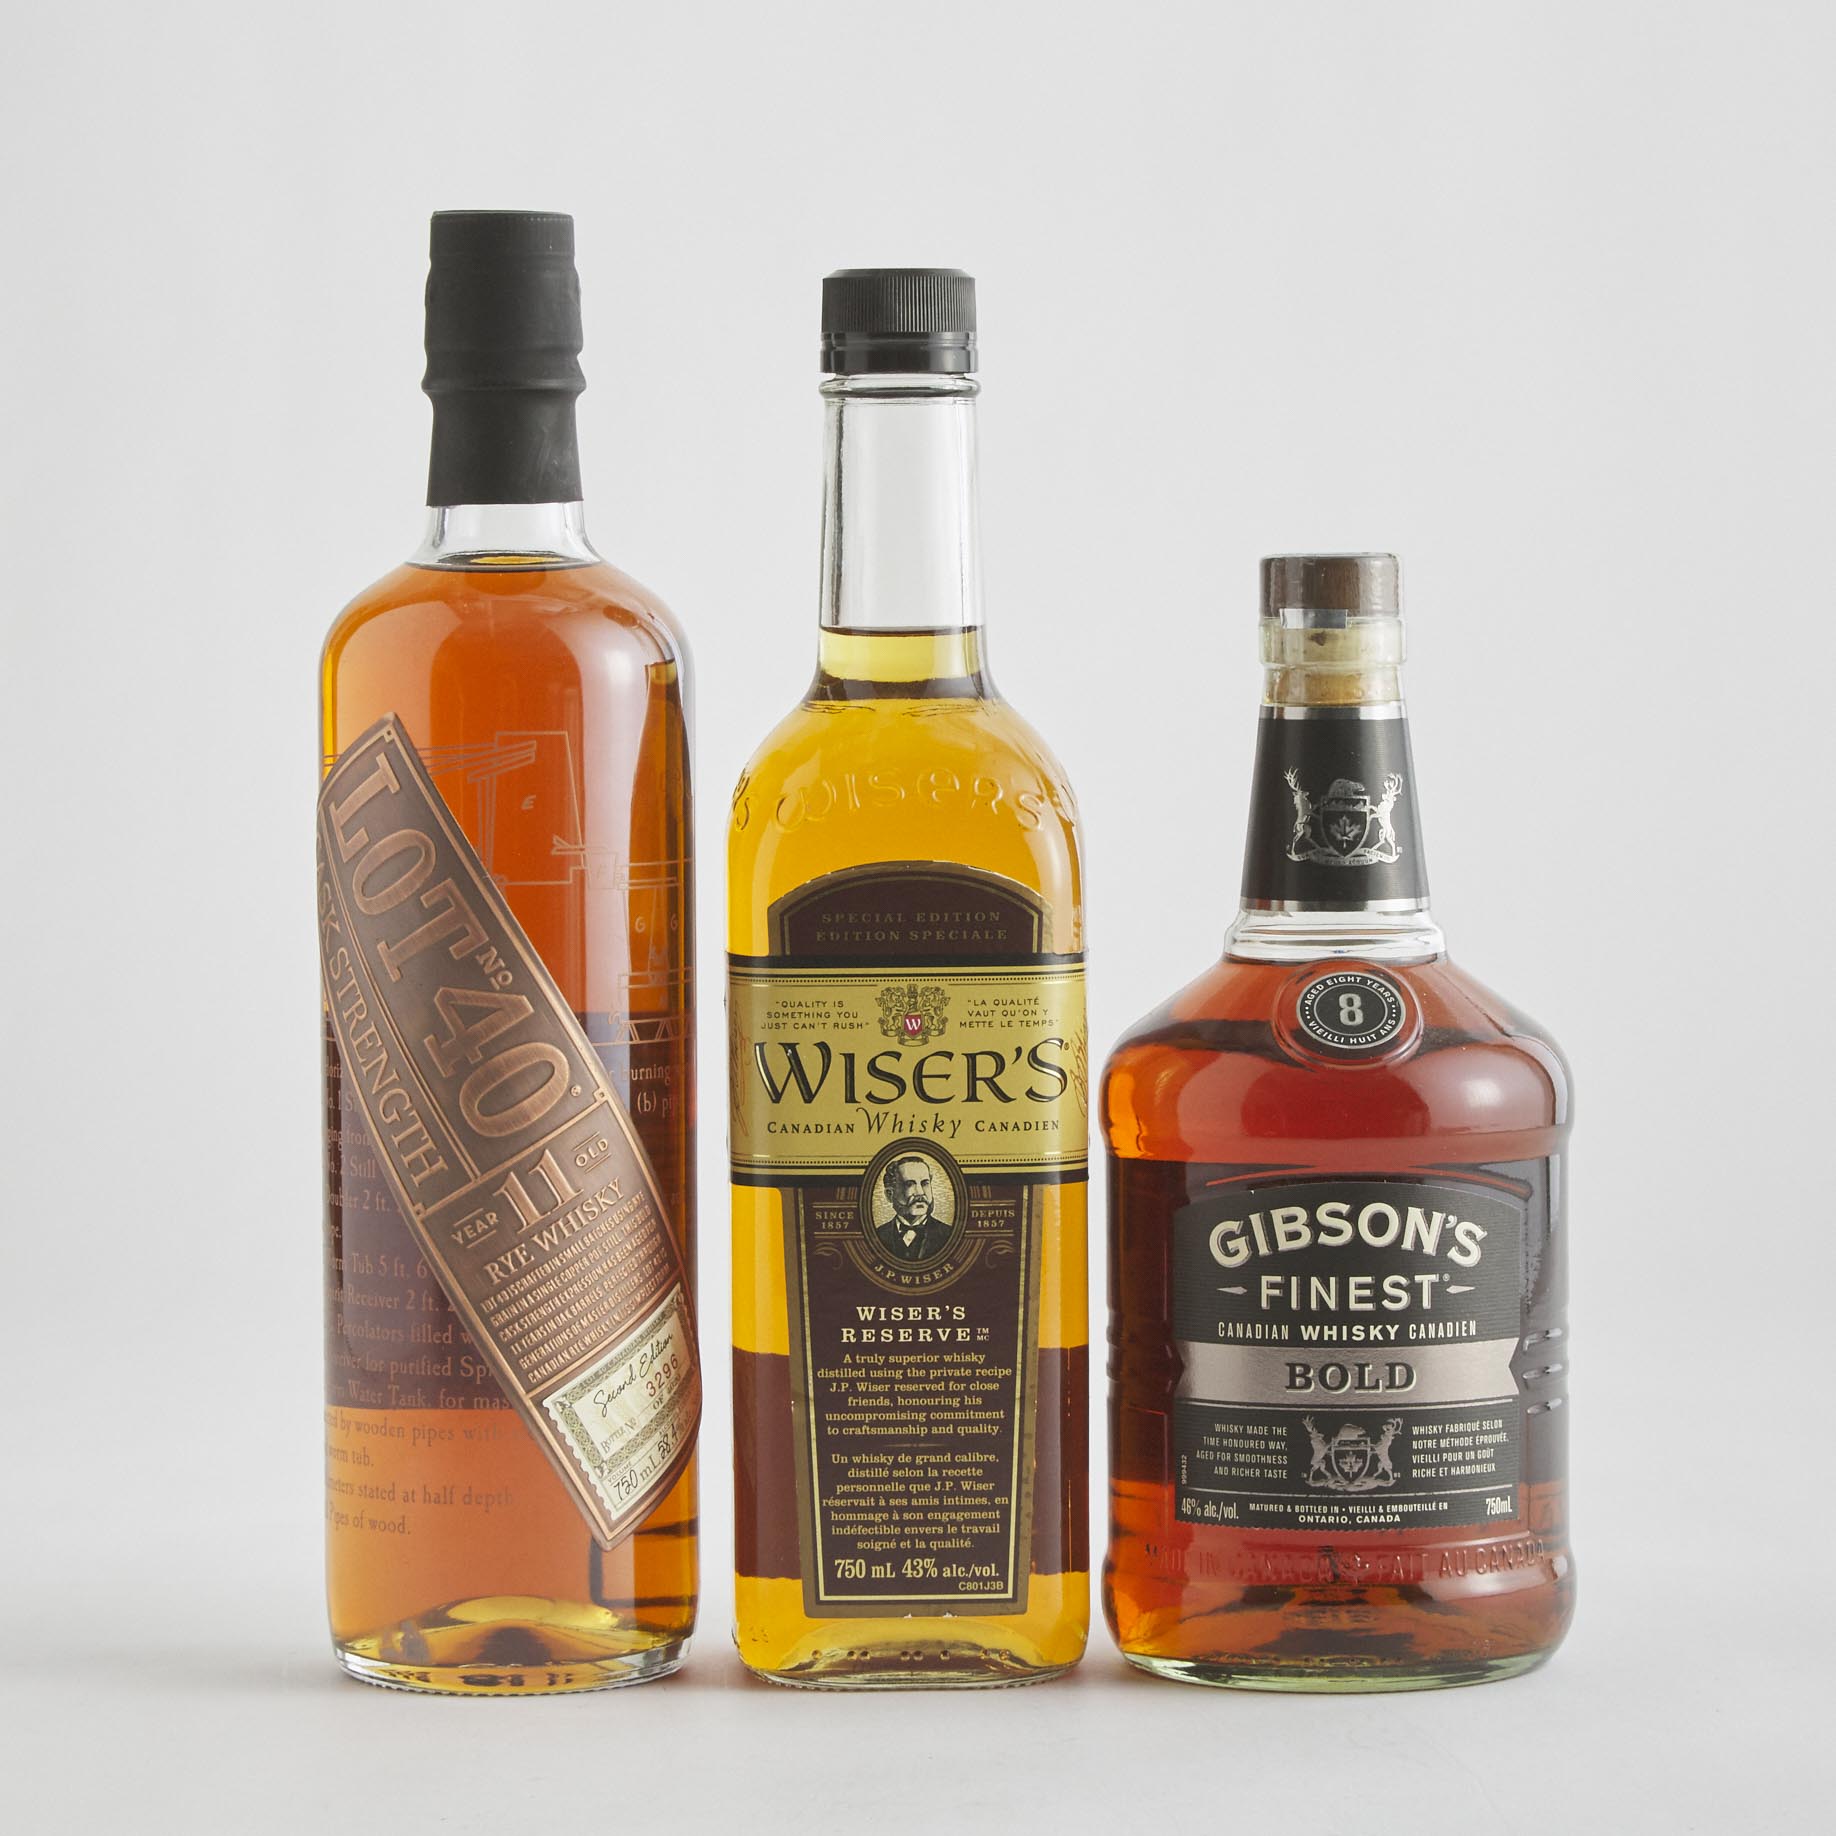 GIBSON'S FINEST CANADIAN WHISKY 8 YEARS (ONE 750 ML)
J.P. WISER’S CANADIAN WHISKY (ONE 750 ML)
LOT NO. 40 RYE WHISKY 11 YEARS (ONE 750 ML)